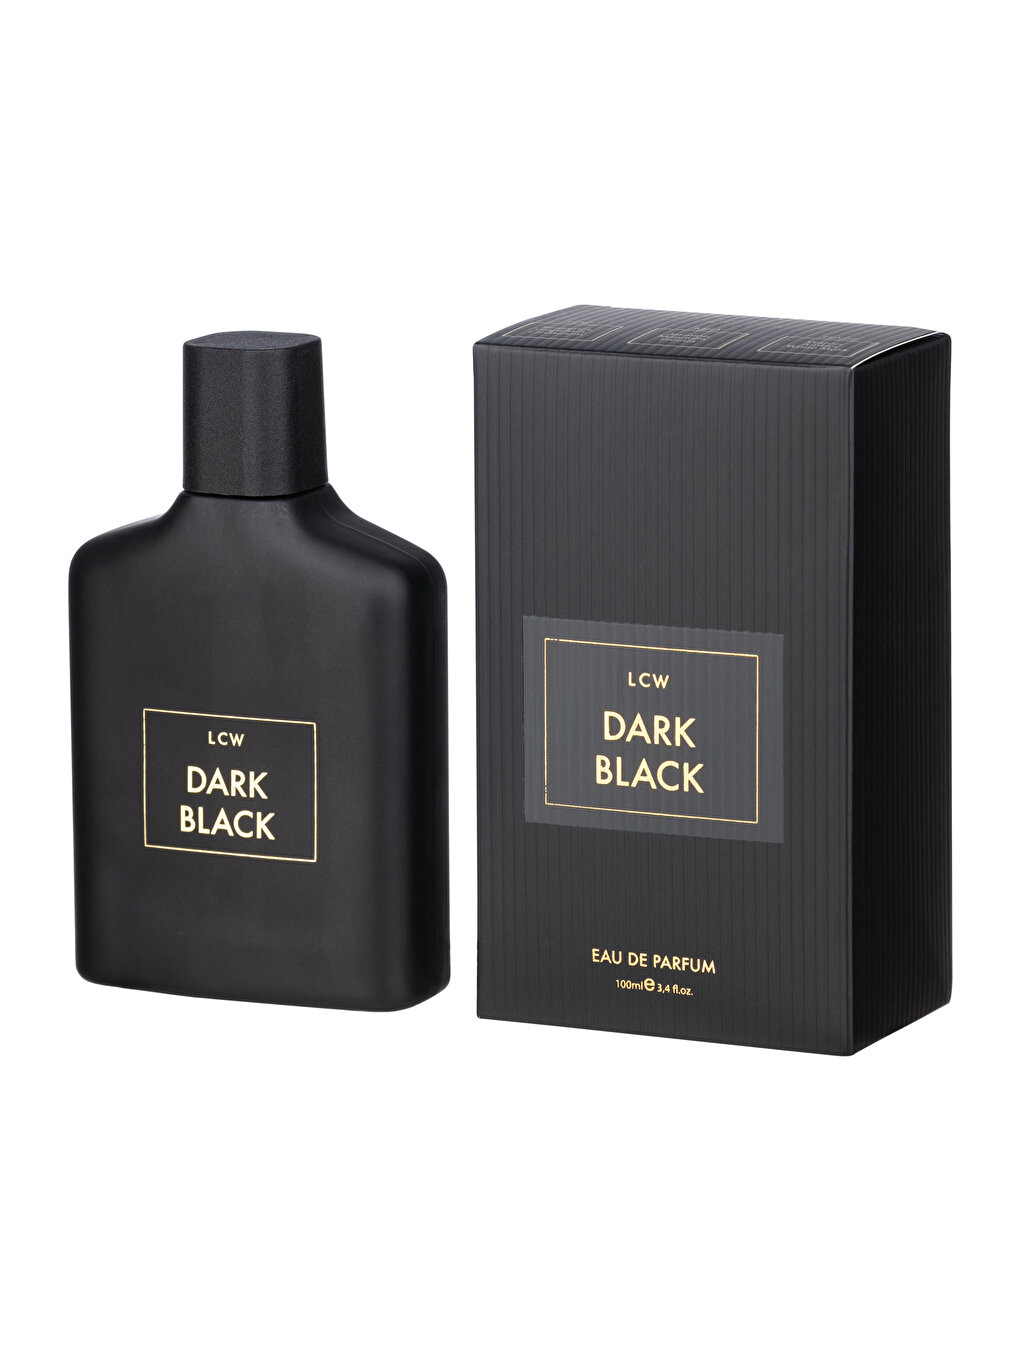 Dark Black EDP Men's Perfume 100 Ml -S25418Z8-M0T - S25418Z8-M0T - LC ...